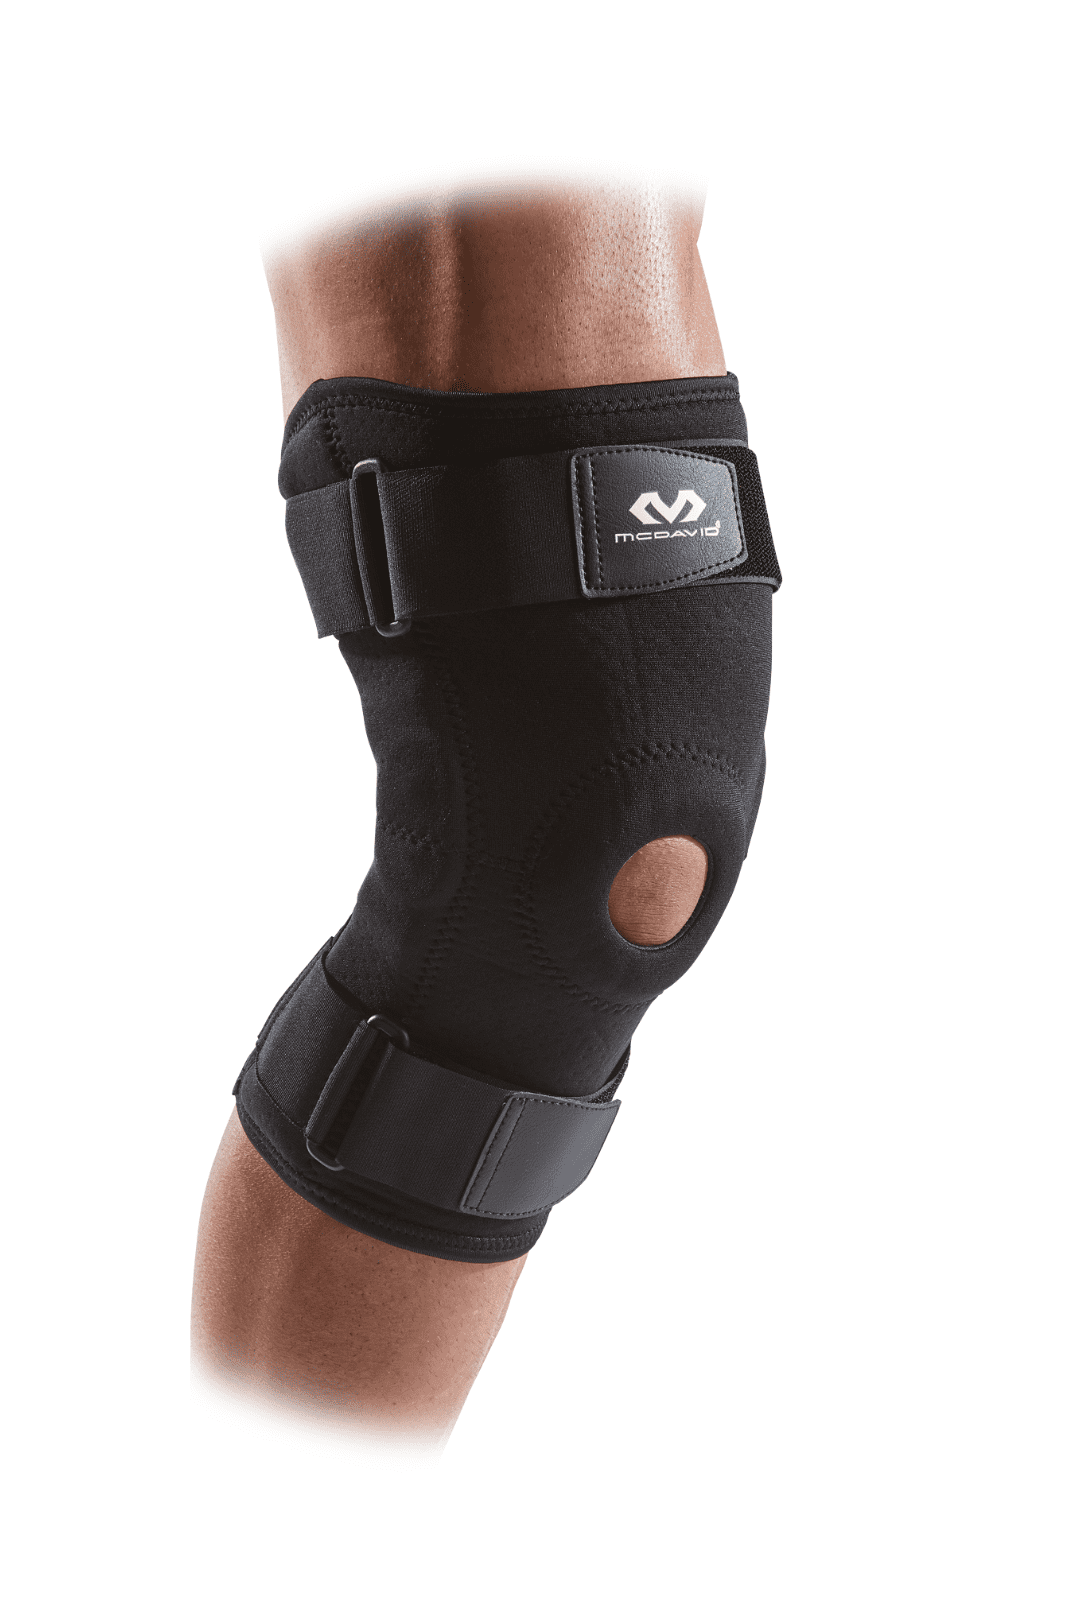 McDavid Knee Brace W/ Dual Hinge Support for Support and Relief,  Small/Medium